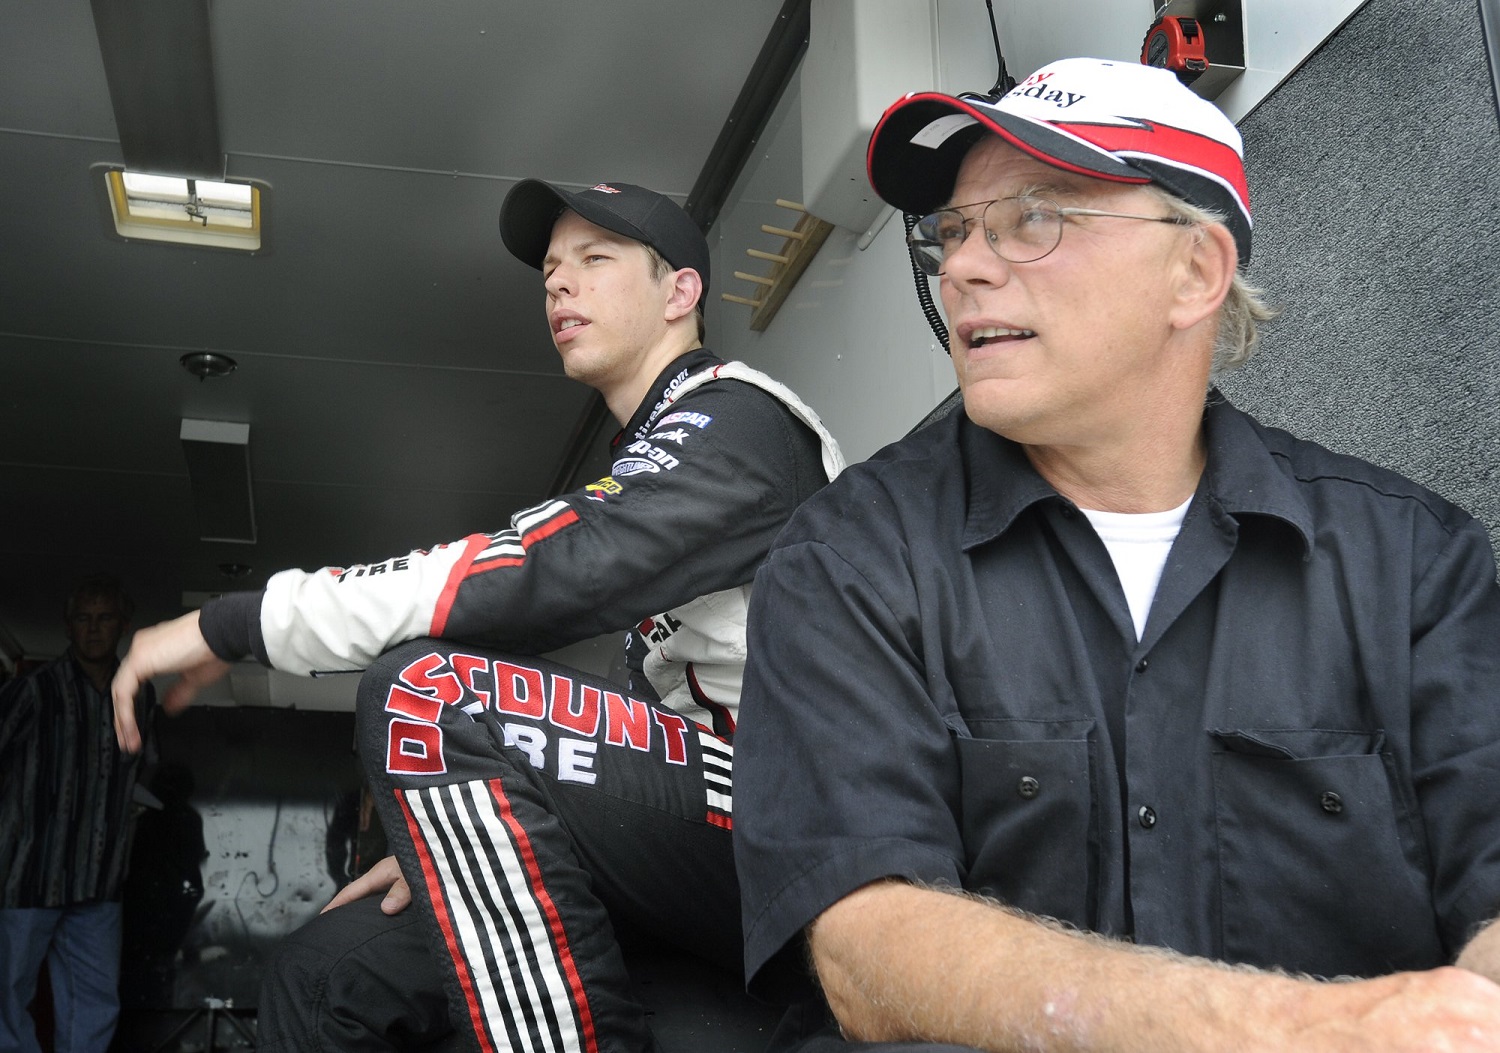 In a 2010 photo, Brad Keselowski tests a car at Oxford Plains Speedway in Oxford, Maine, with his dad Bob Keselowski.